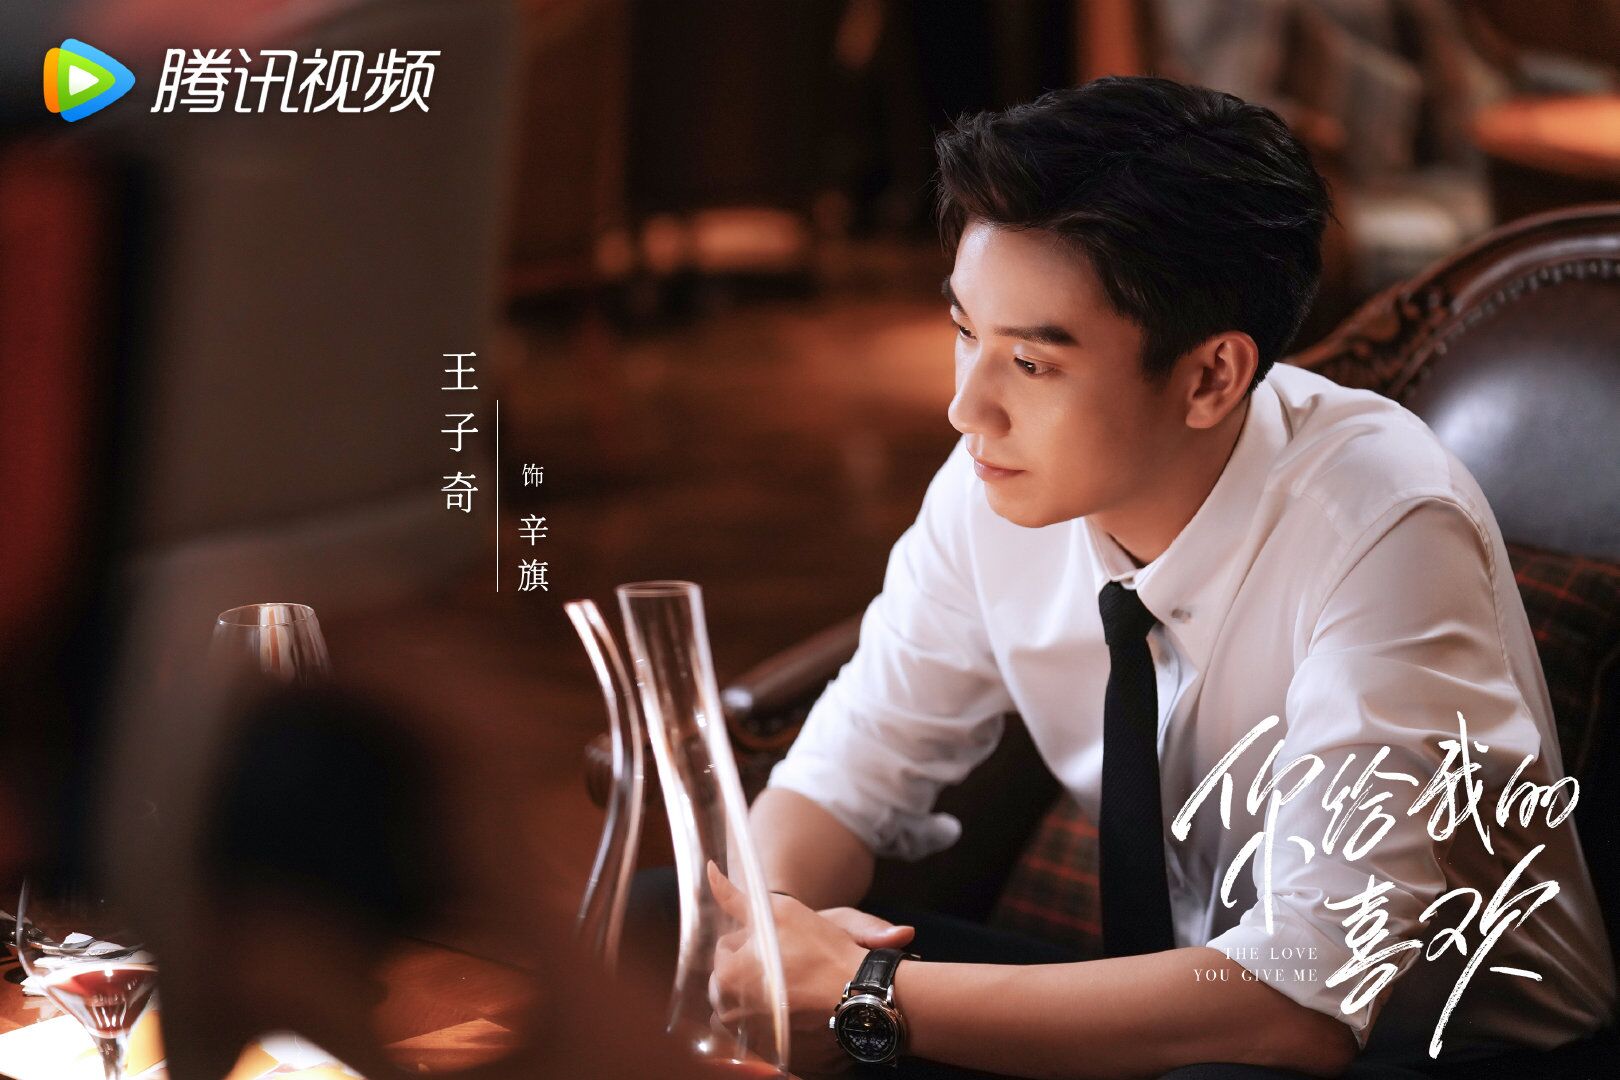 The Love You Give Me Photo with Wang Ziqi, HD Image, Wallpaper - CPOP HOME